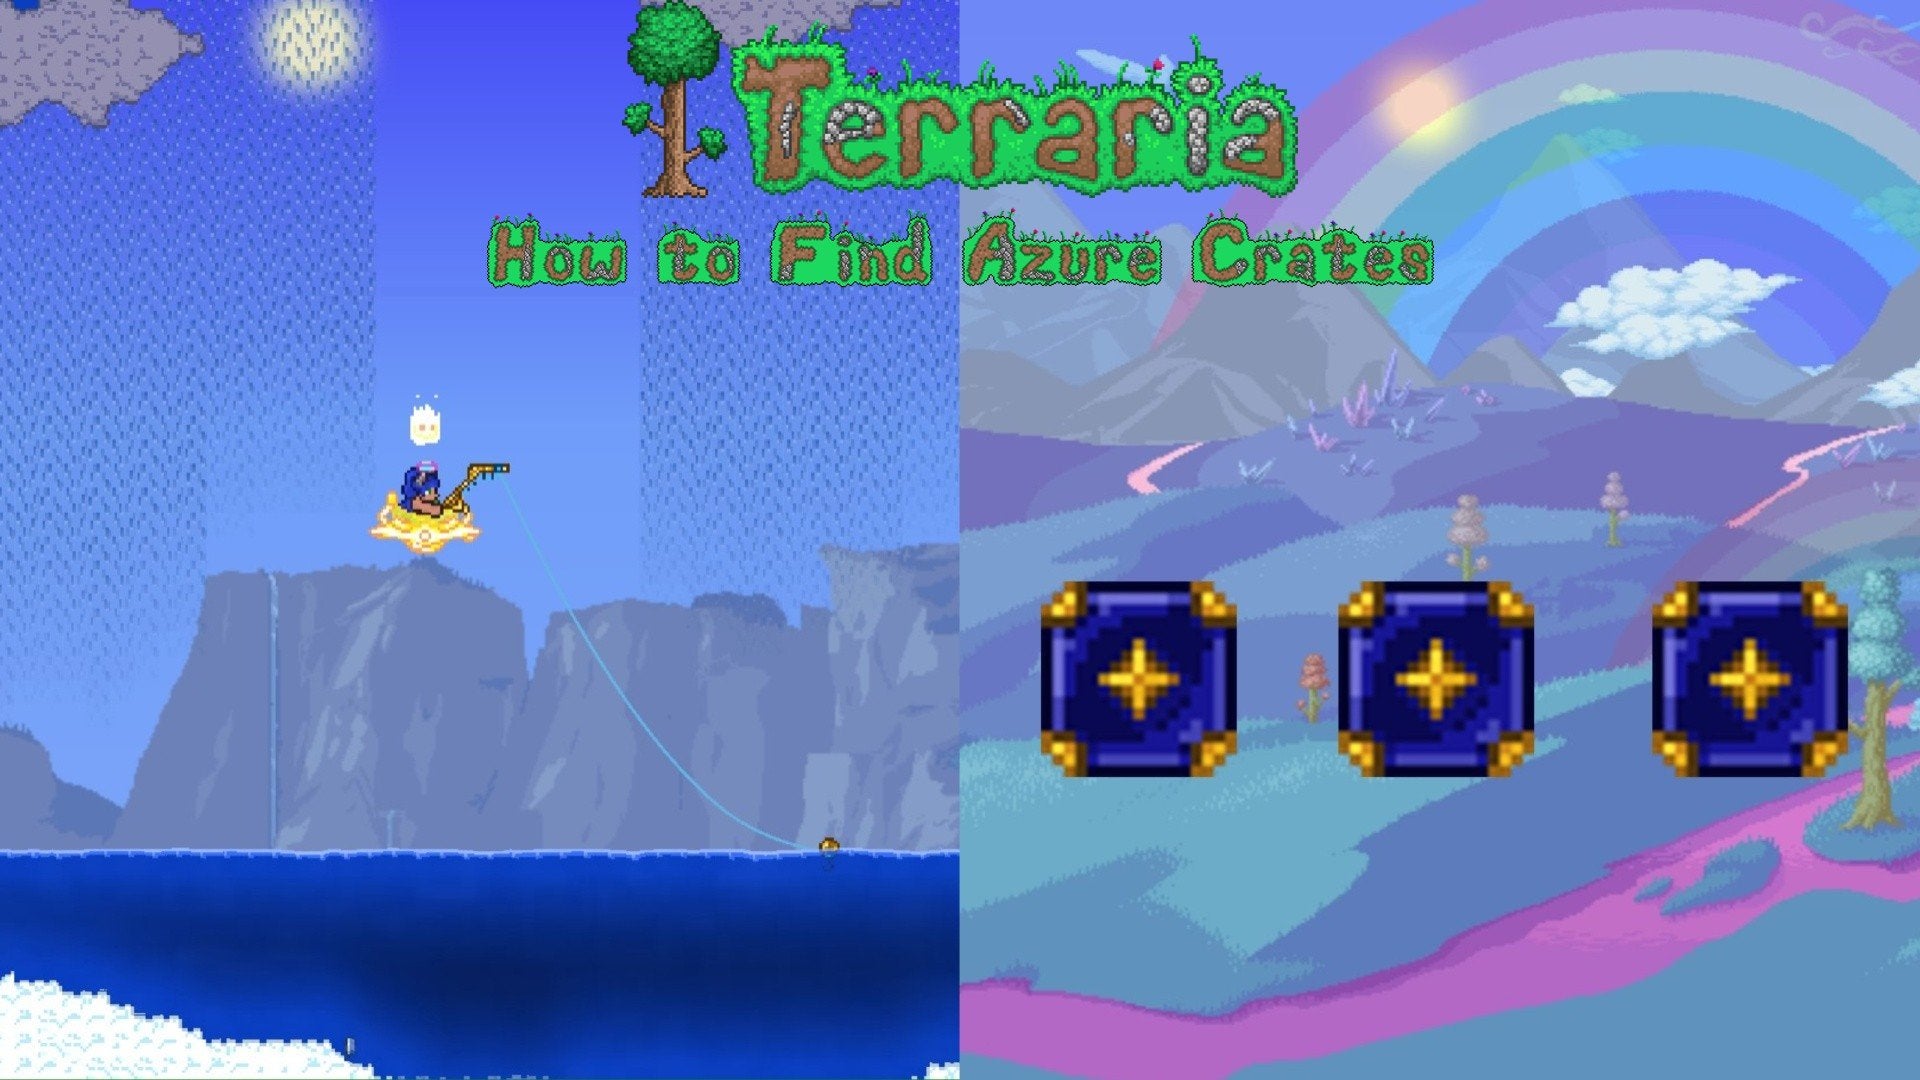 To the left is a player fishing on a Floating Lake for Azure Crates, and on the right are three Azure Crates, which are dark blue boxes with yellow corners.